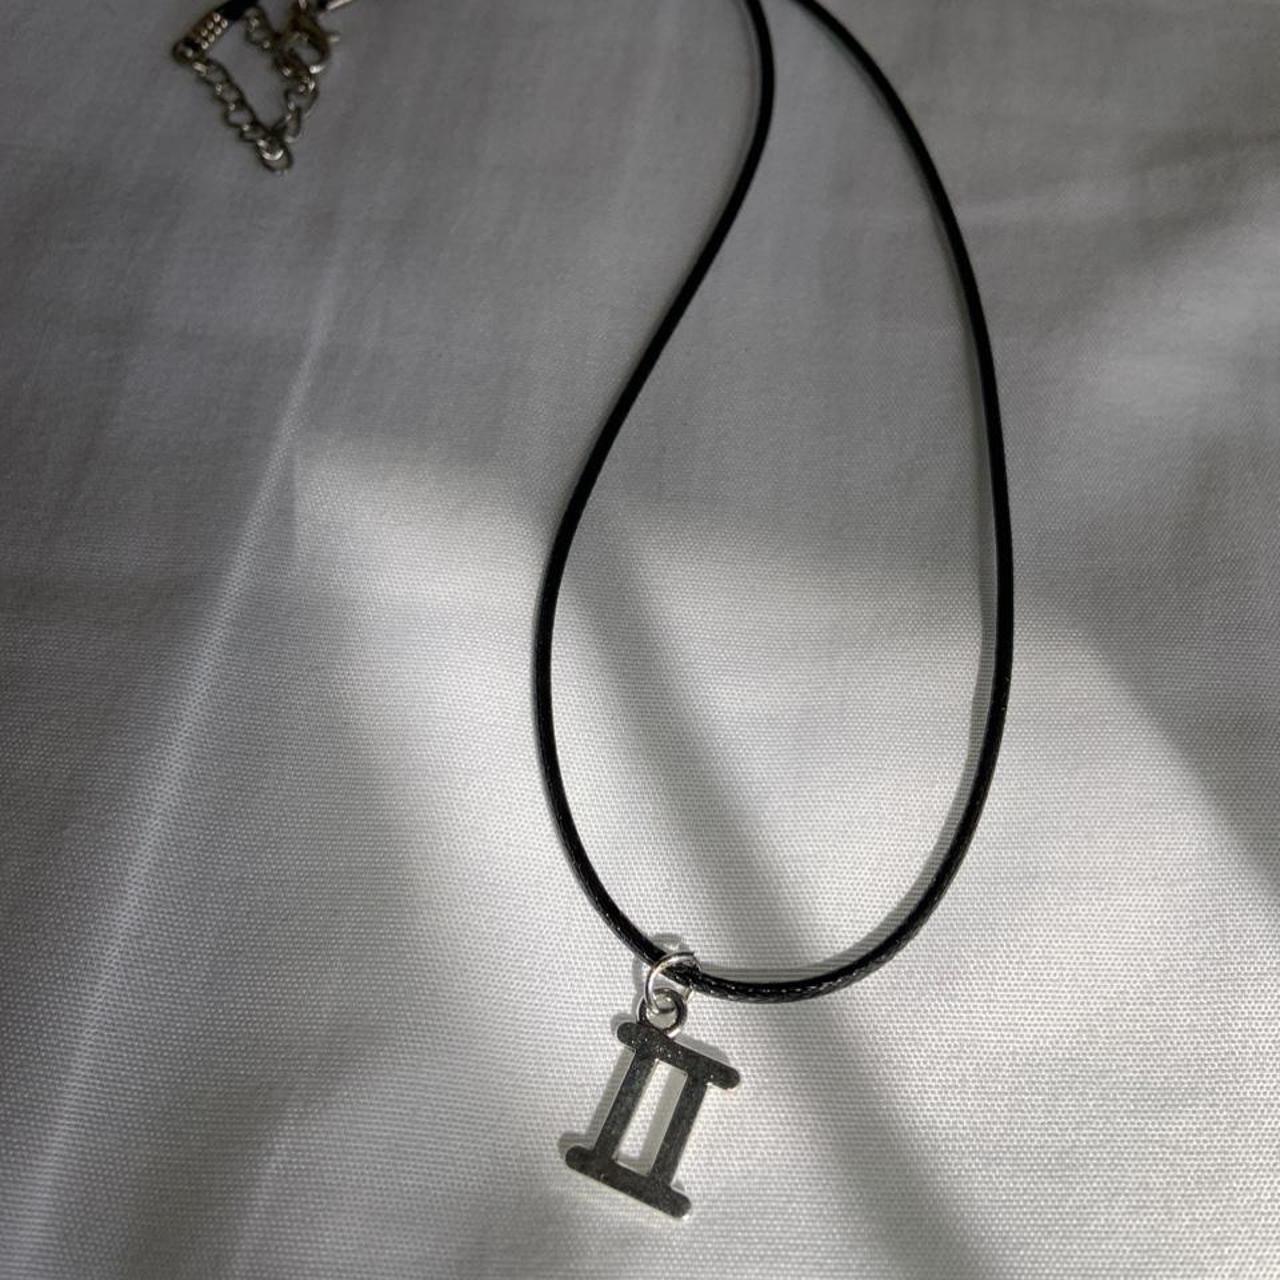 Razor blade necklace (plastic) *You will only - Depop